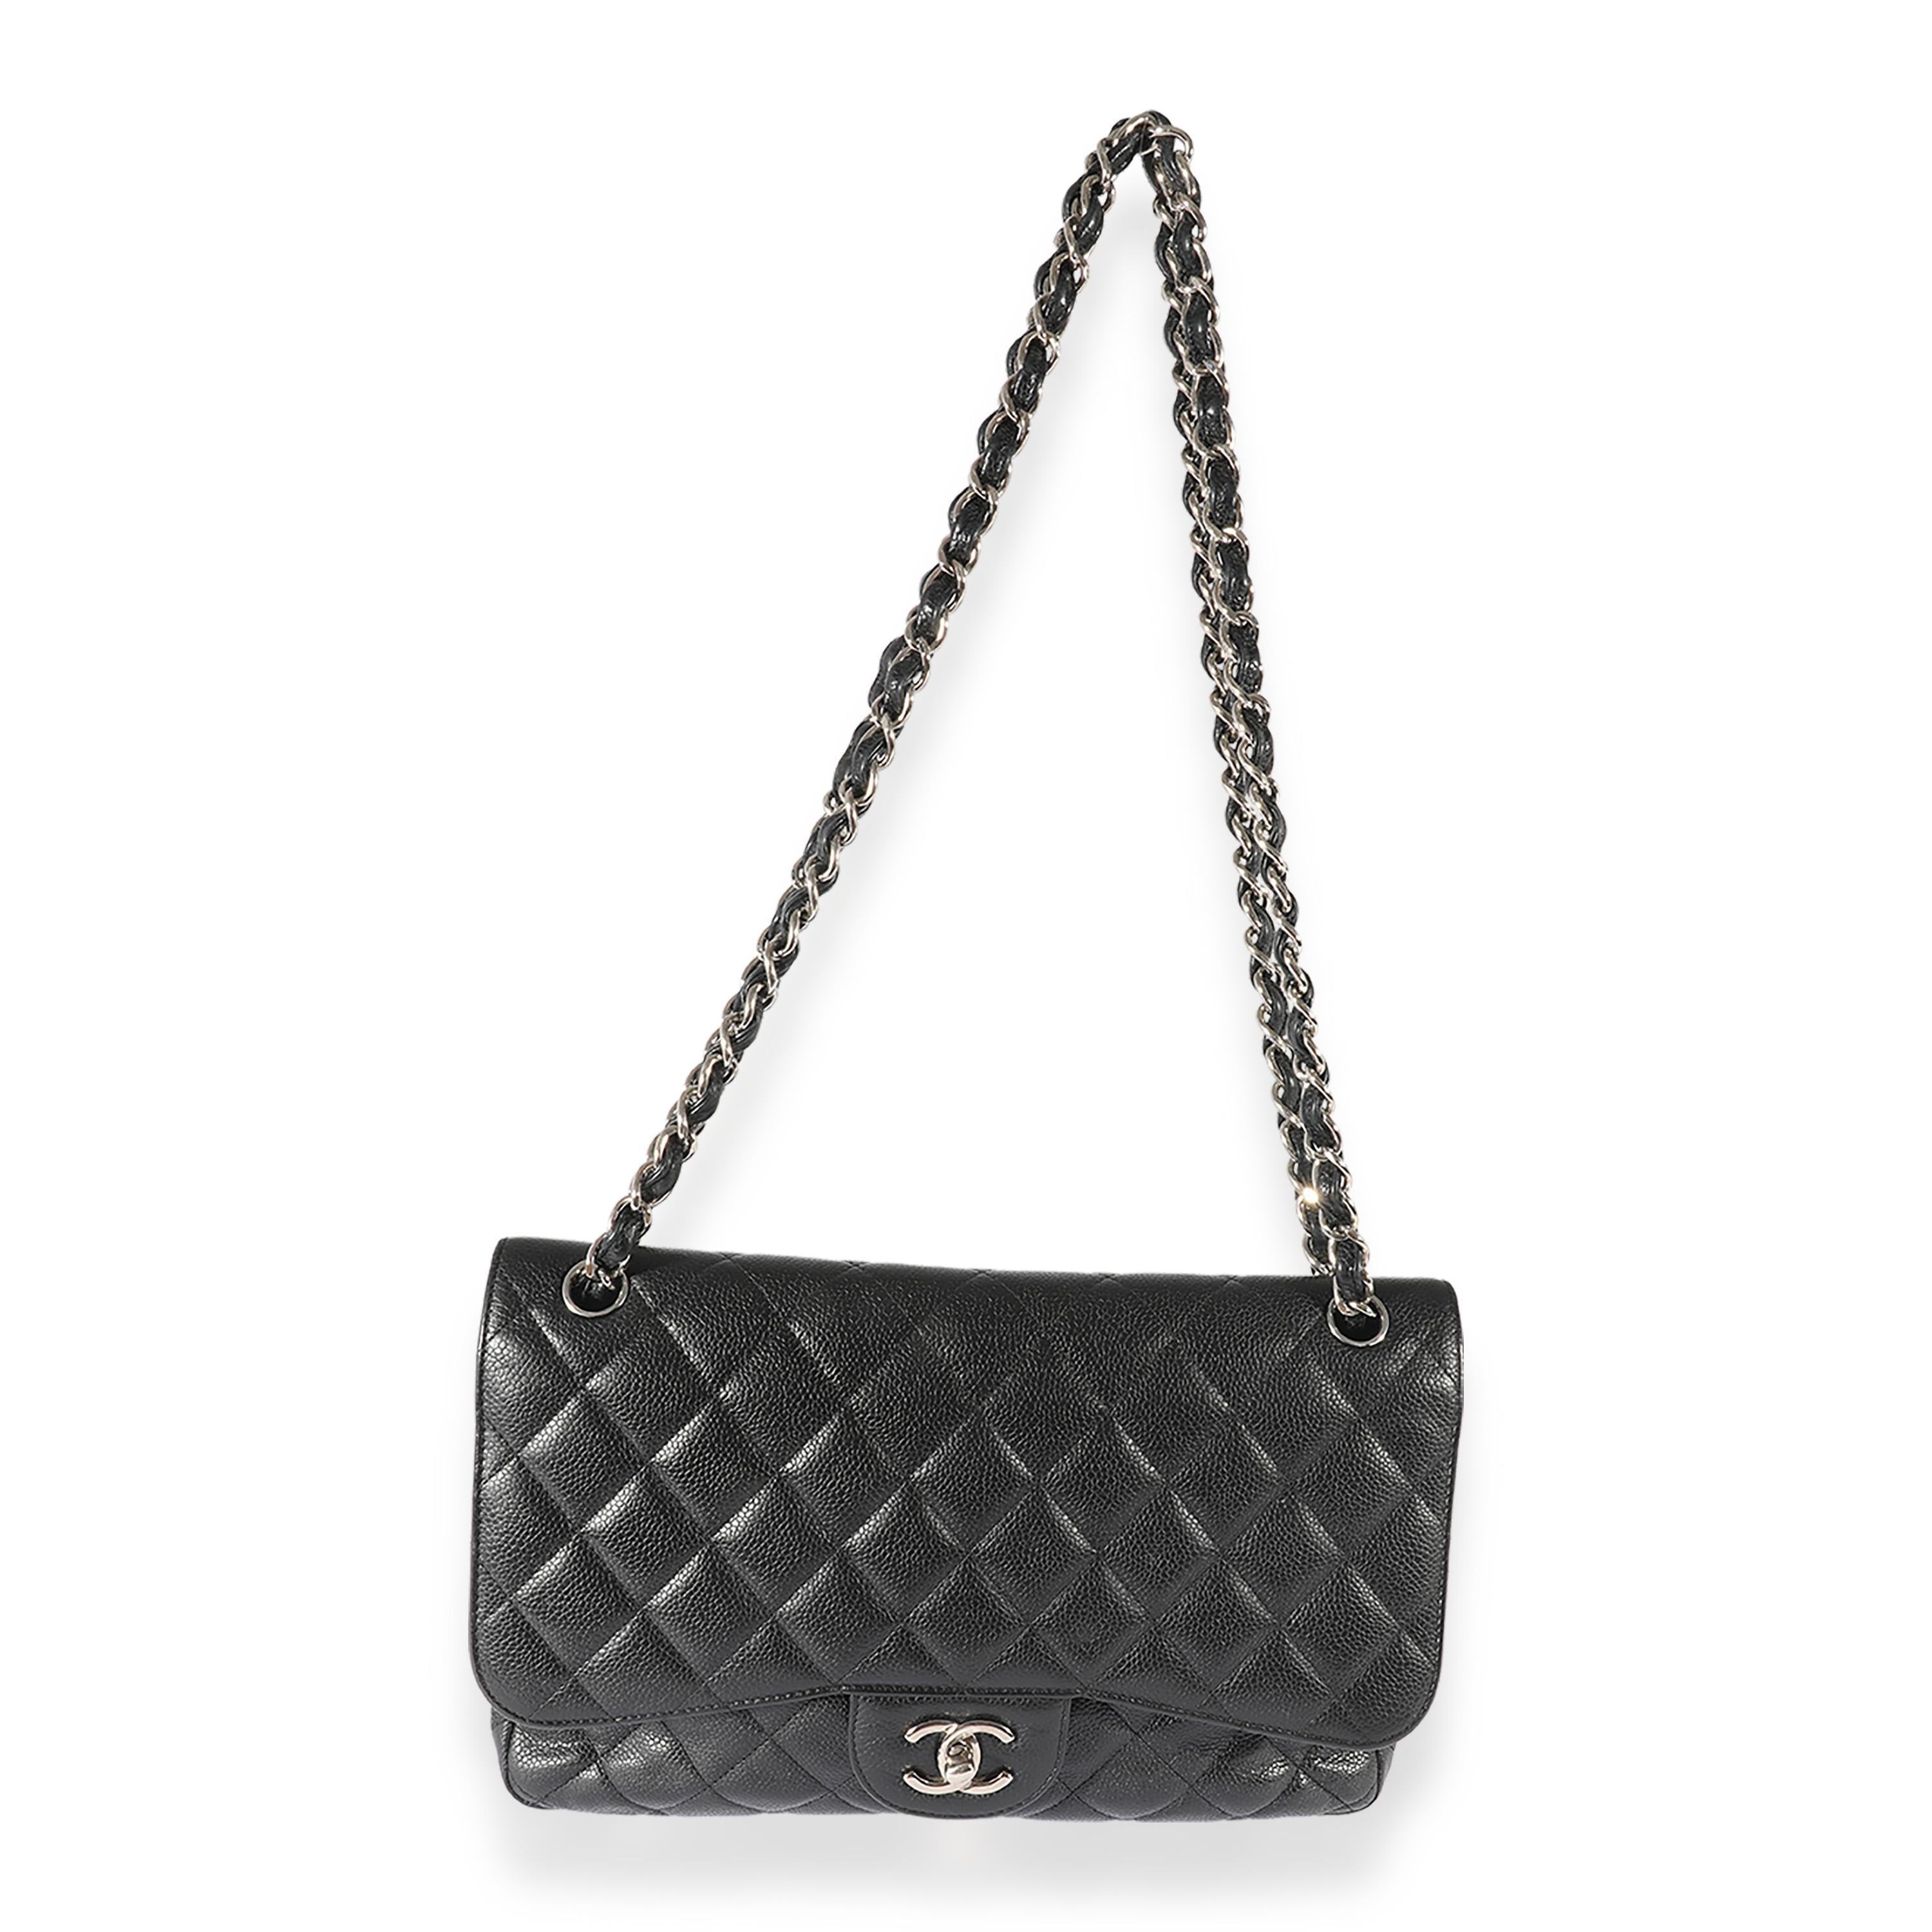 Listing Title: Chanel Black Caviar Leather Jumbo Double Flap Bag
SKU: 125800
Condition: Pre-owned 
Handbag Condition: Fair
Condition Comments: Fair Condition. Corners and interior have been repainted. Scratching to hardware. Press marks throughout